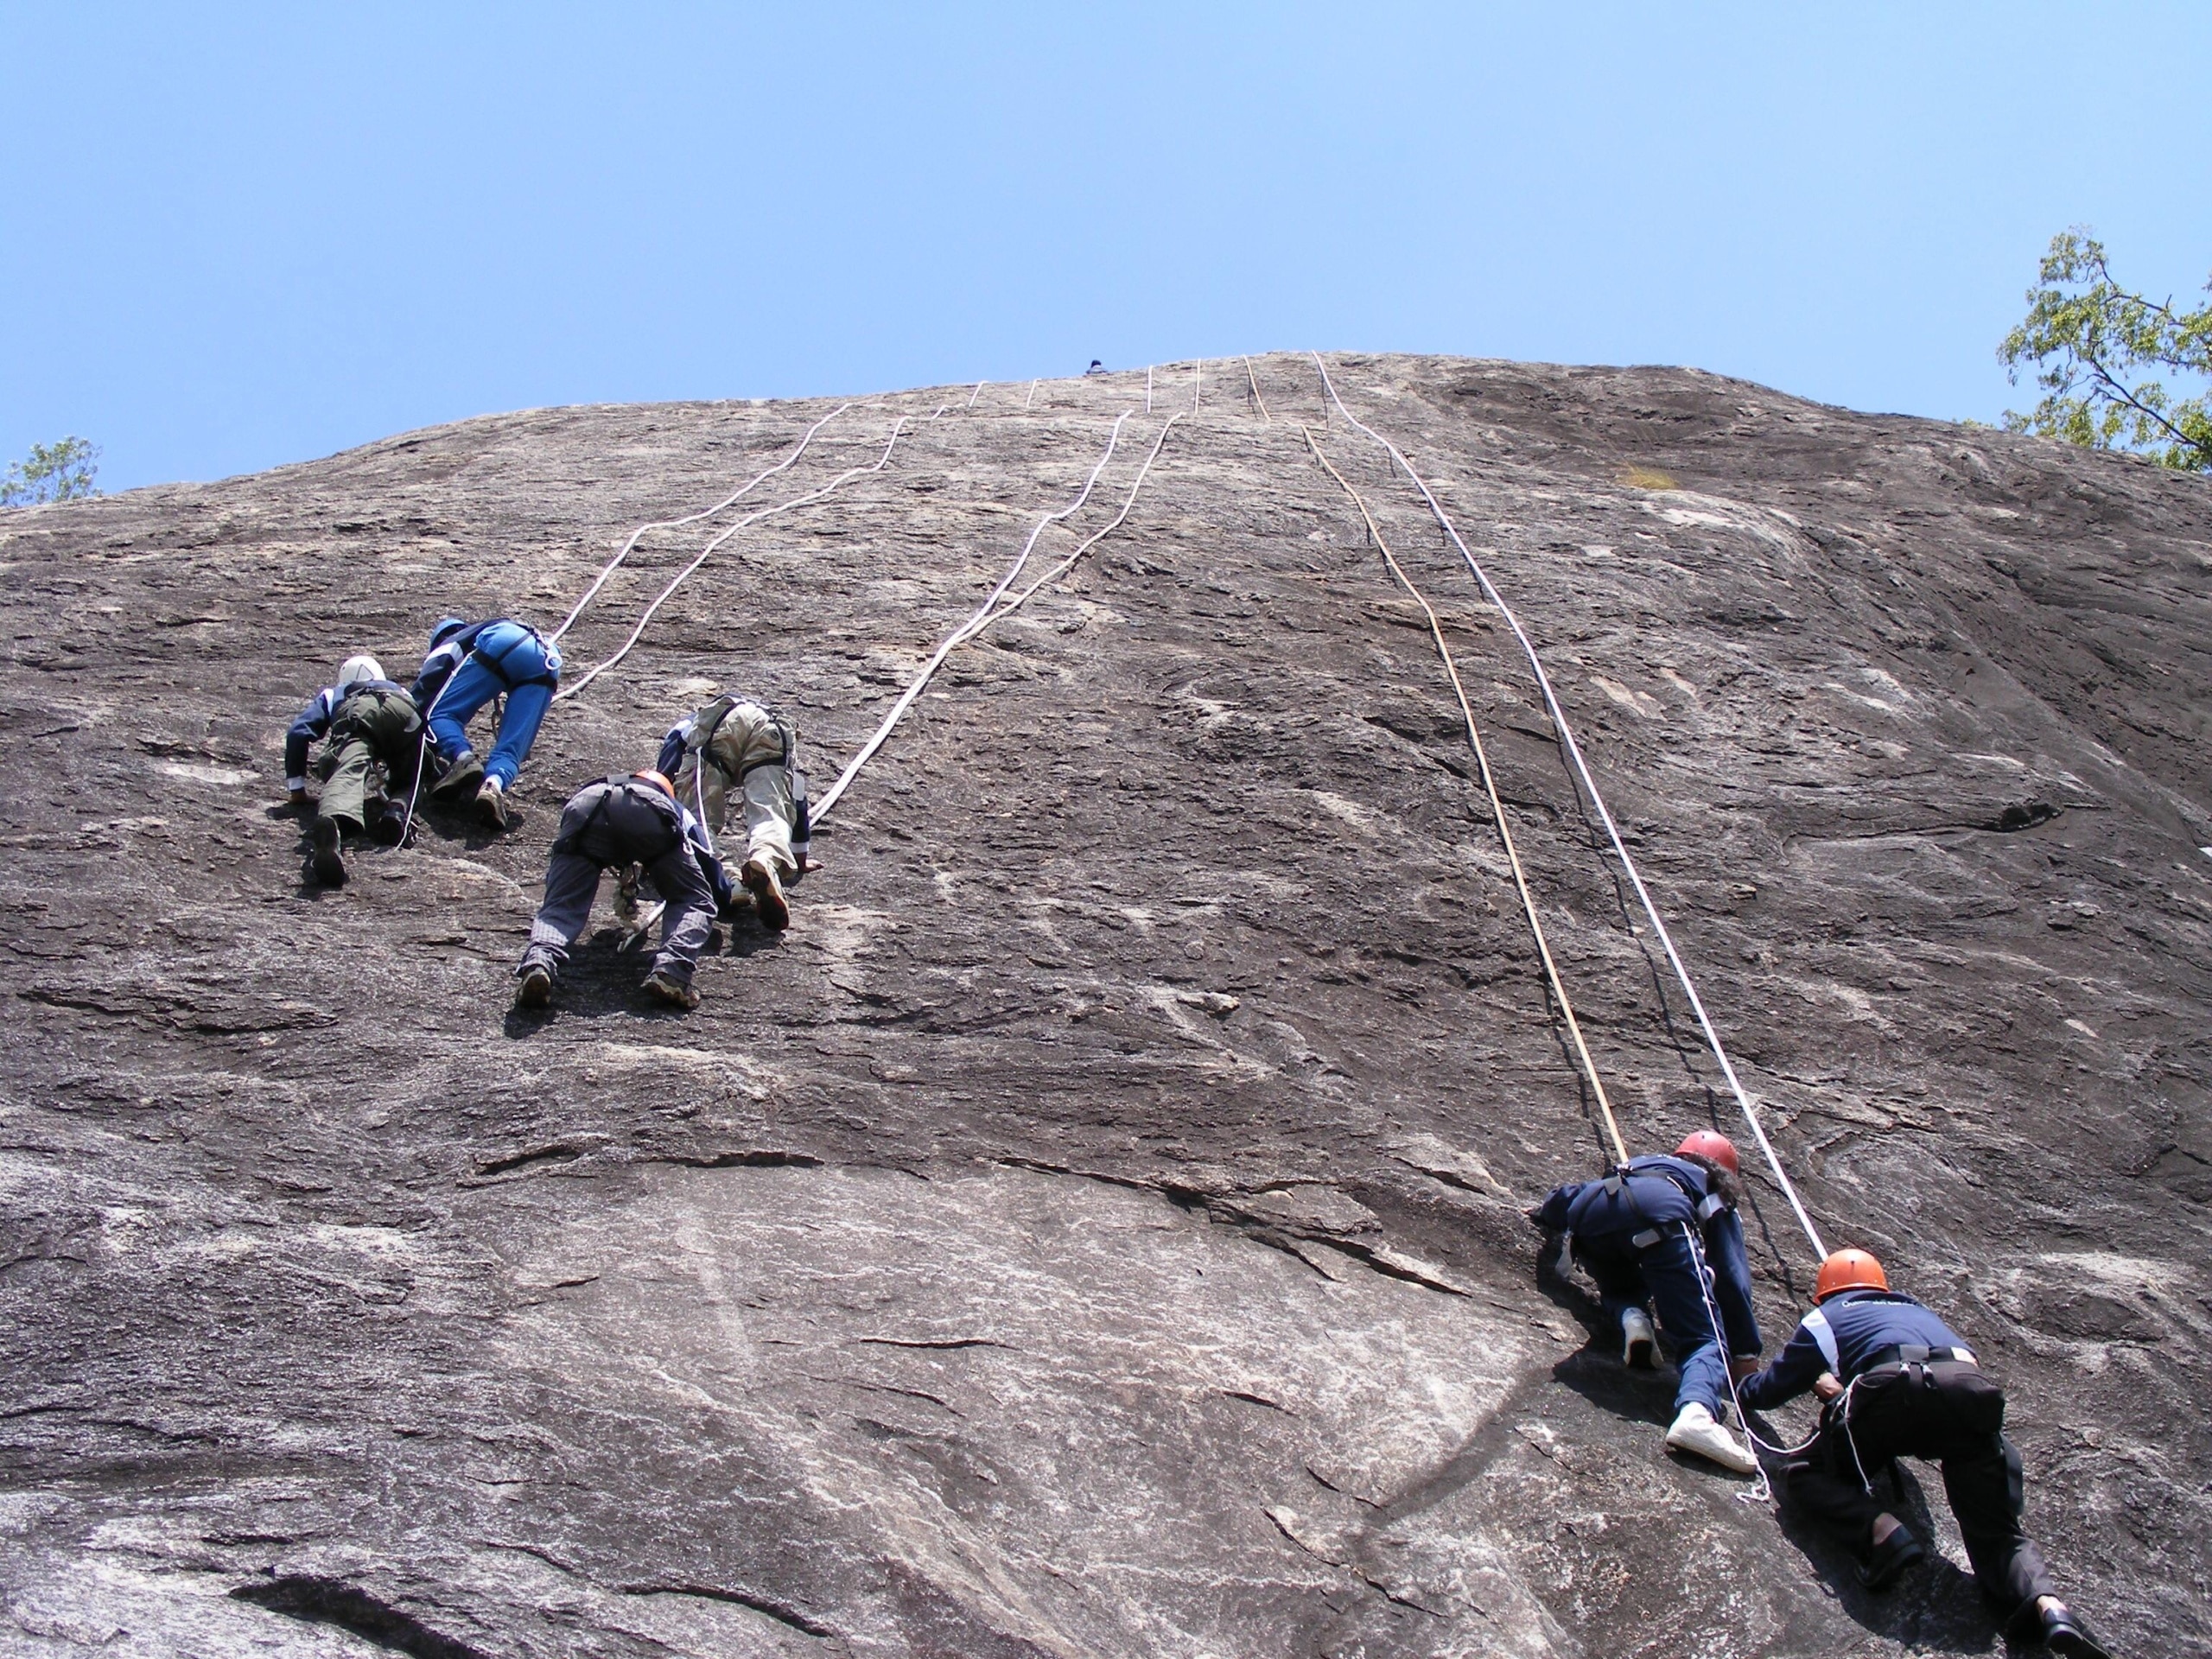 climbers scale a mountain rock face in climbing gear and red hats during an Outward Bound activity summer camp